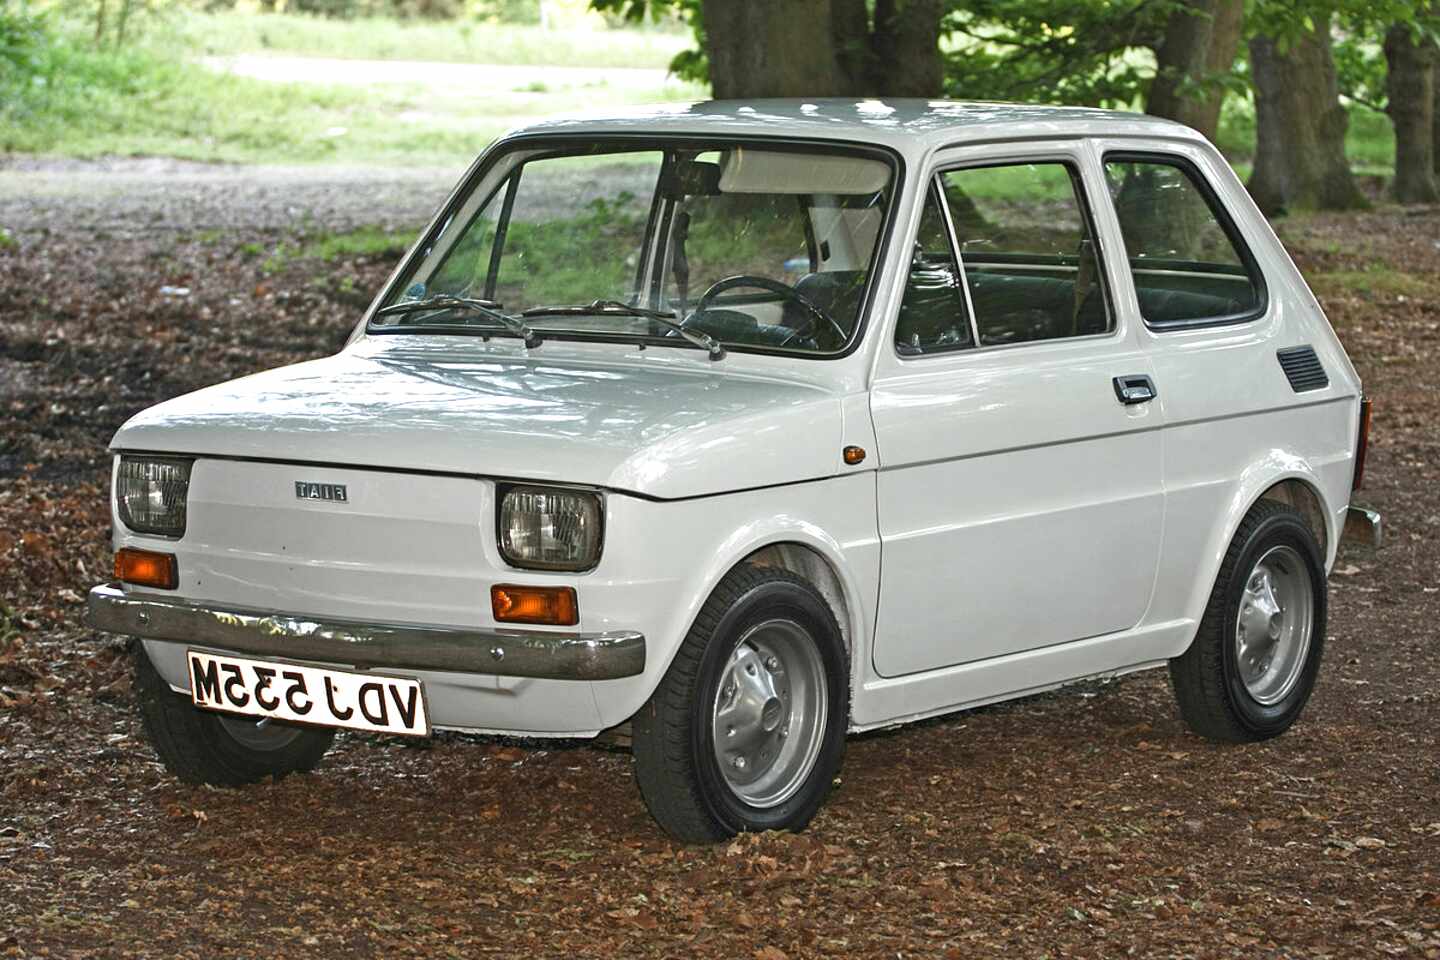 Second hand Fiat 126 Car in Ireland View 38 bargains